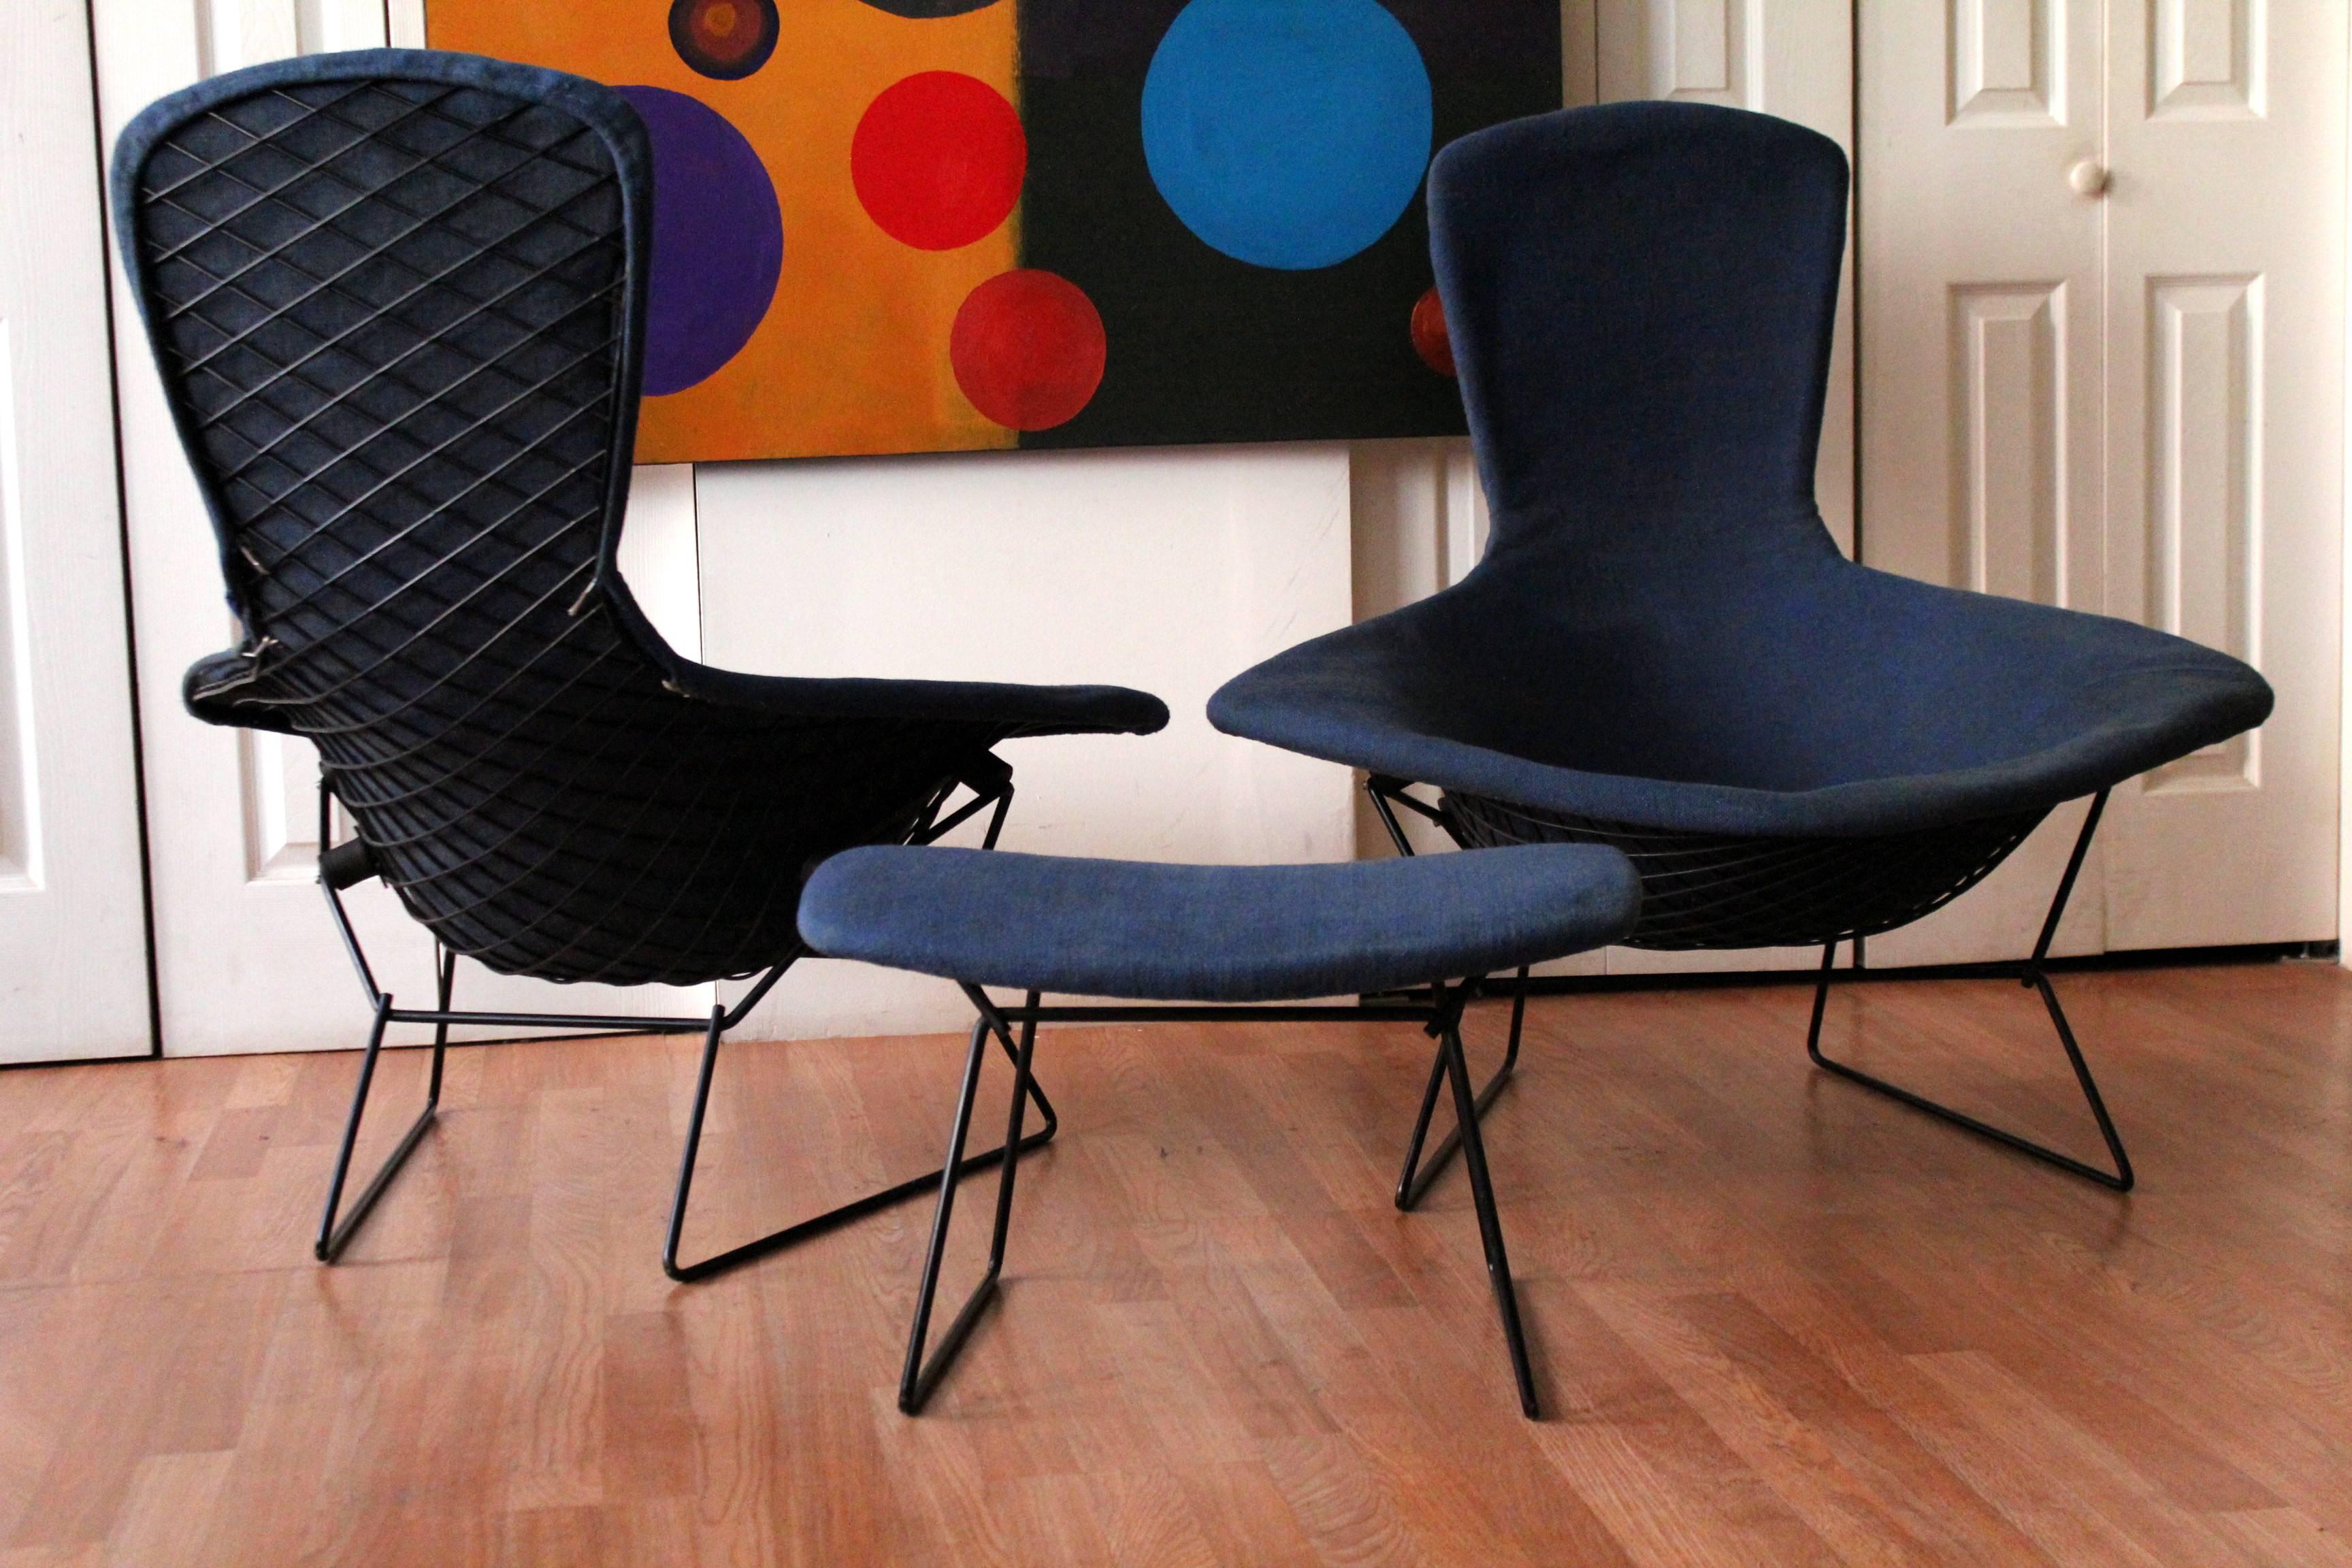 Authentic early collectors grade pair of Harry Bertoia for Knoll bird chairs with ottoman. Sourced from the historic Chicagoland Hyde Park neighbourhood of President Obama, these all original (one owner) vintage chairs retain their original Knoll